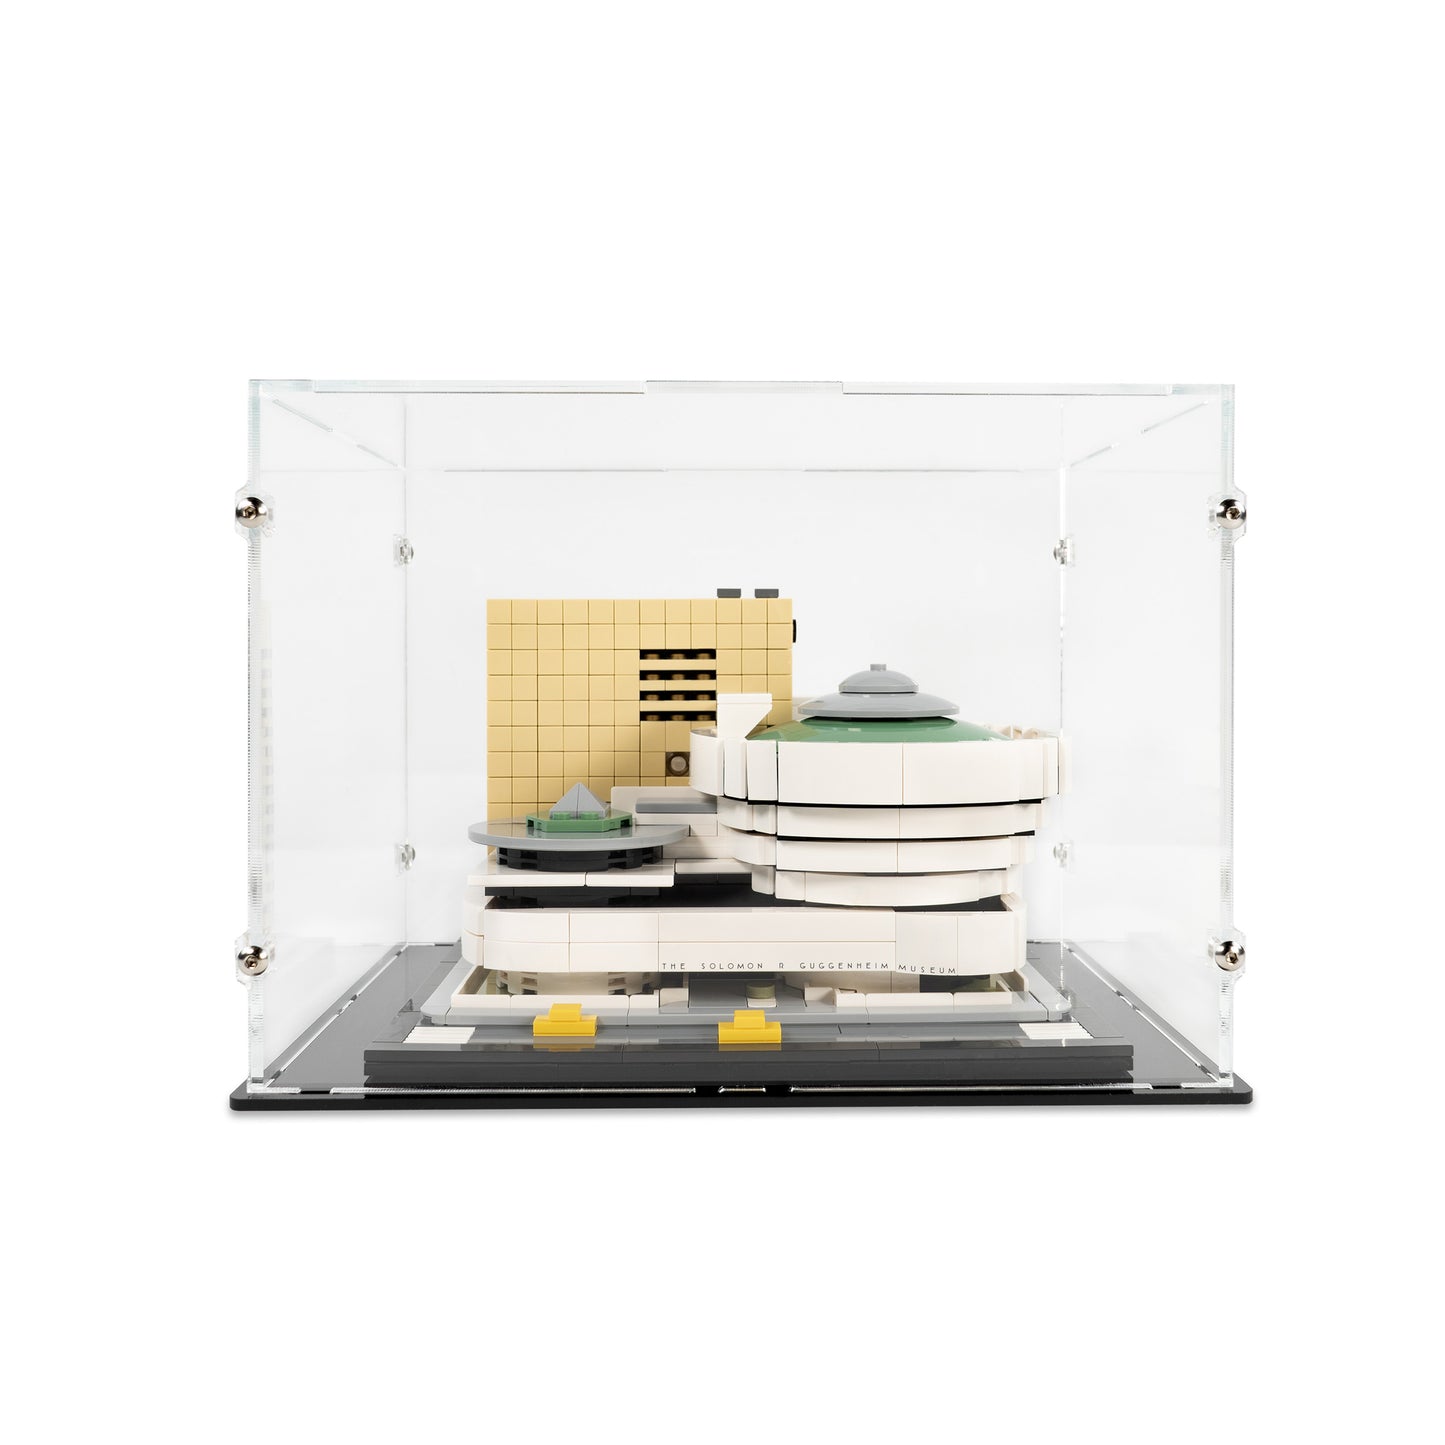 Front view of LEGO 21035 Solomon R Guggenheim Museum Display Case.